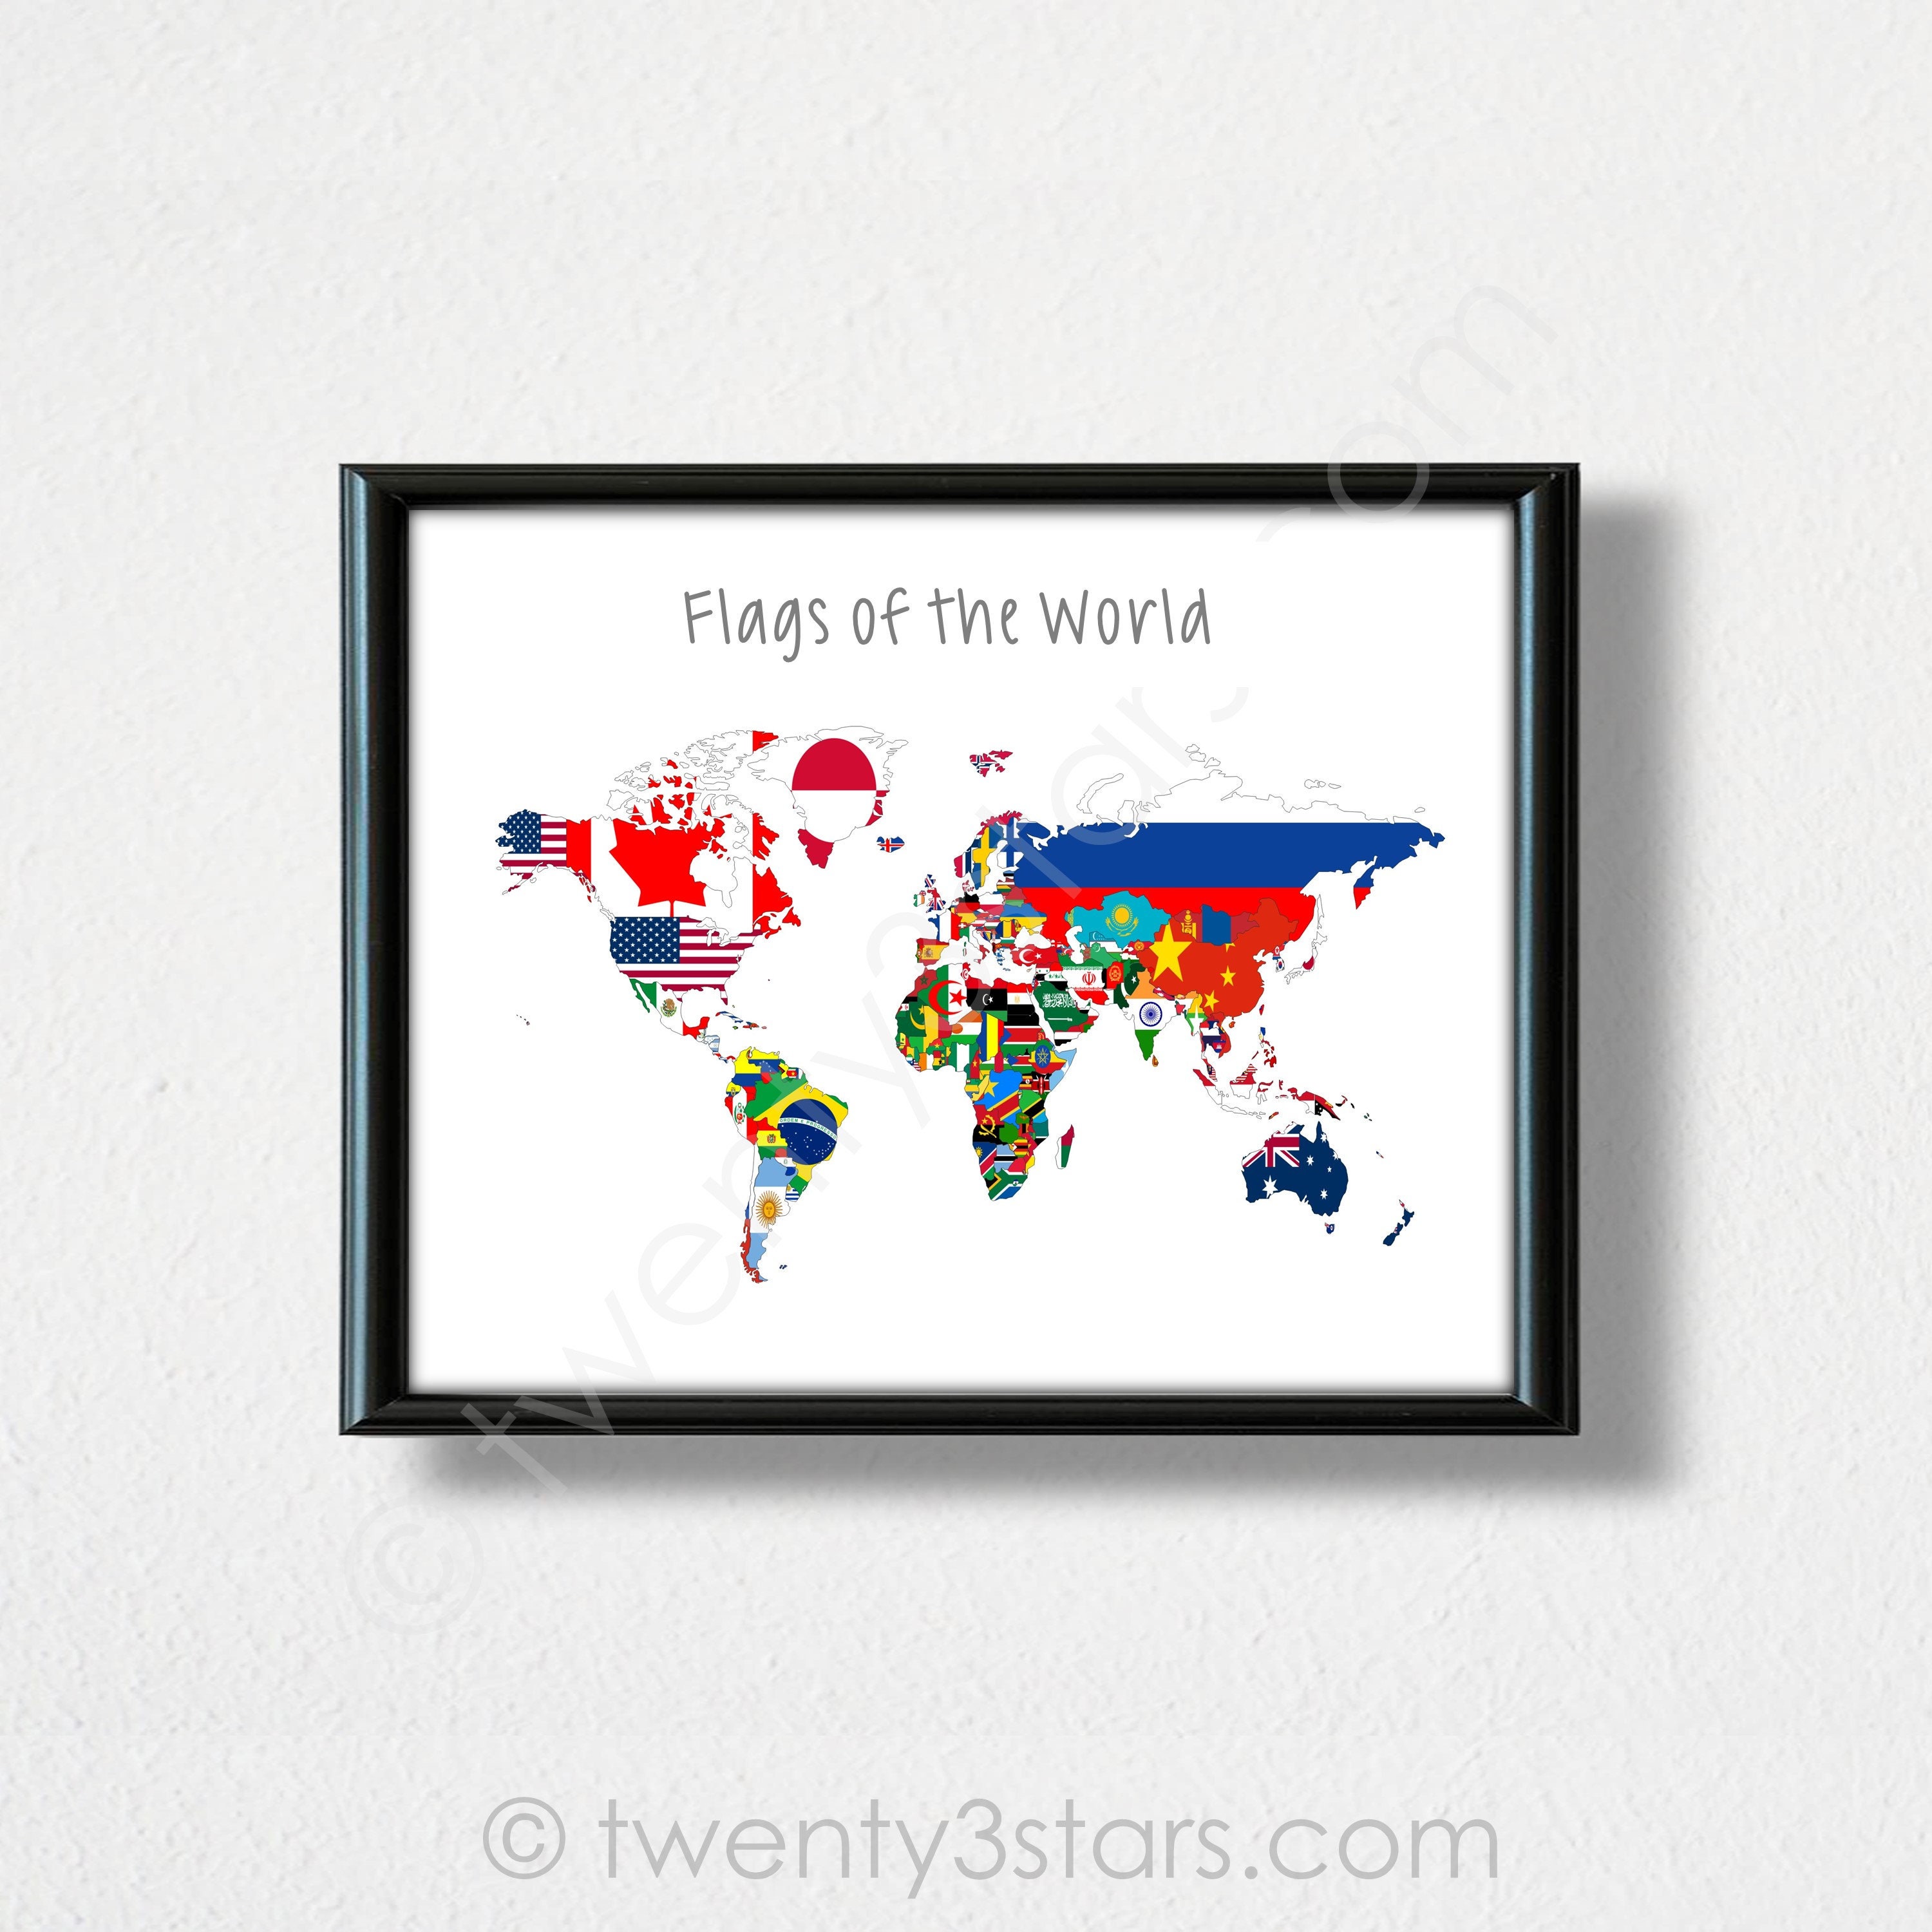 24x36 GEOGRAPHY COLOR FLAGS 33057 WORLD MAP POSTER 